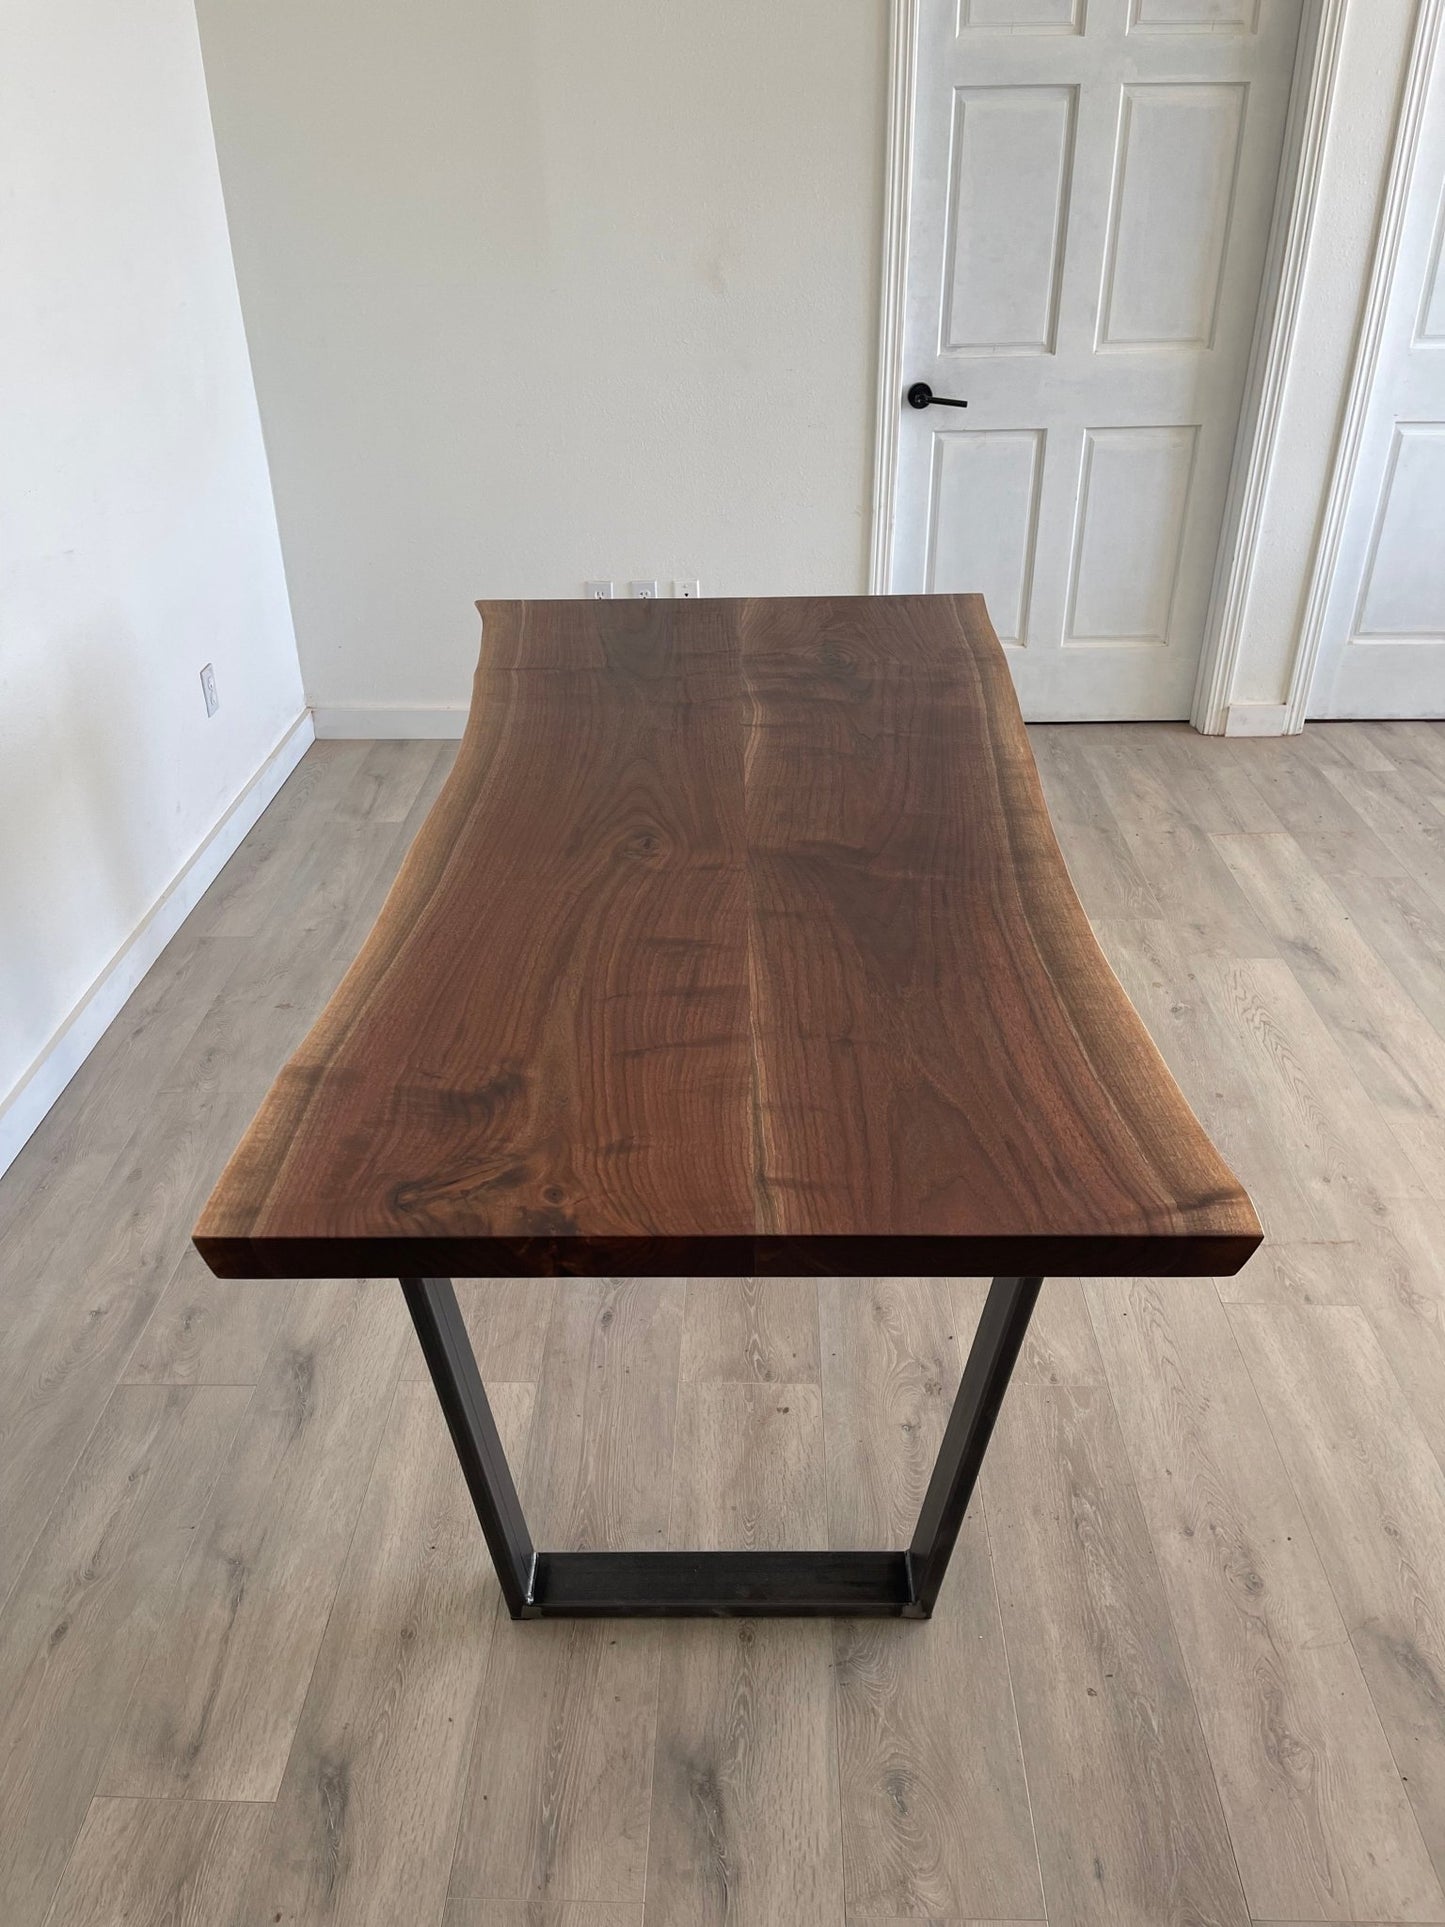 Black Walnut Book Matched Live Edge Table - FargoWoodworks